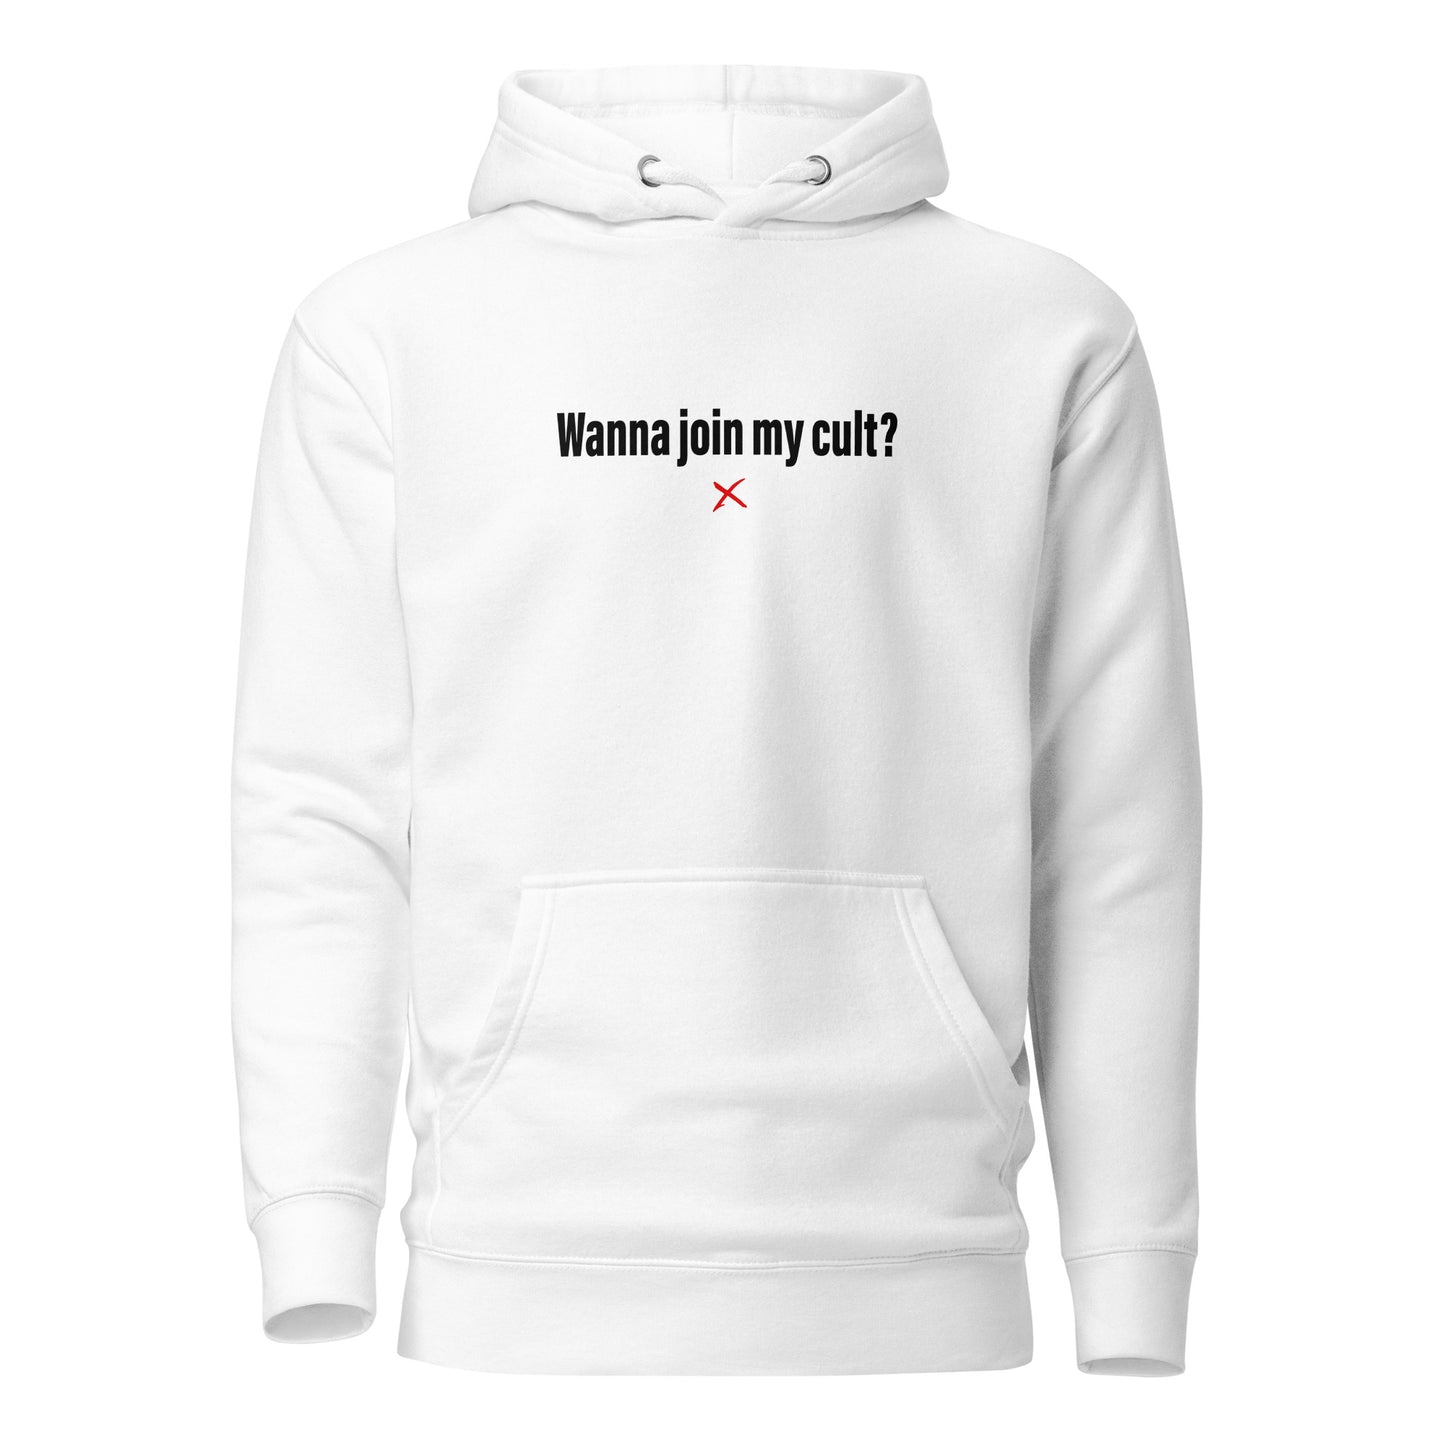 Wanna join my cult? - Hoodie